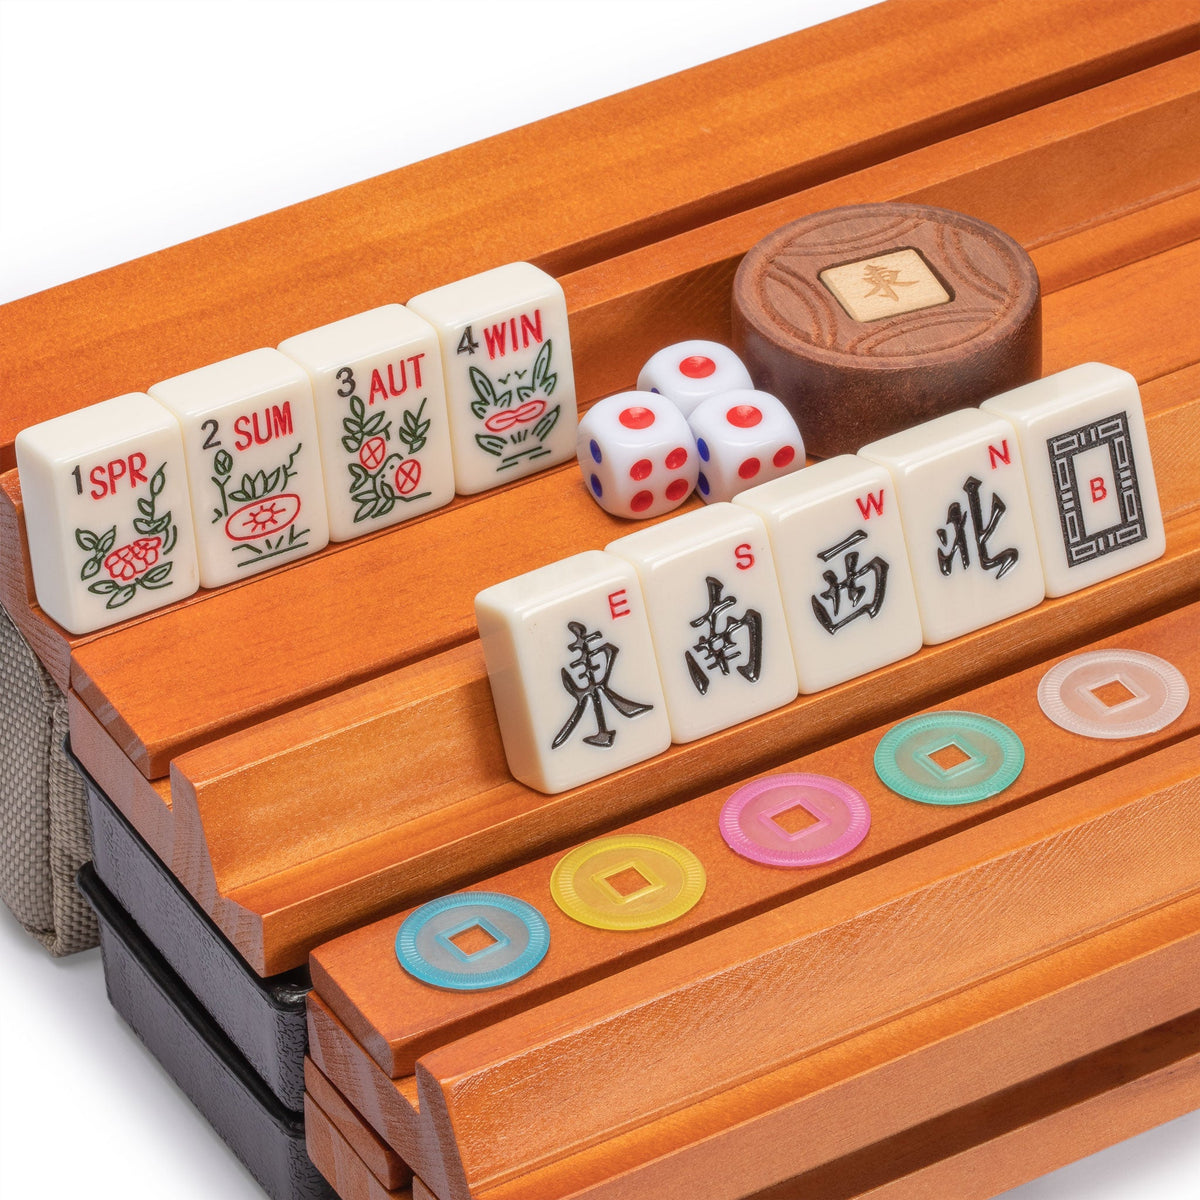 Decorative Mahjong set with Web in beige and ebony Supreme